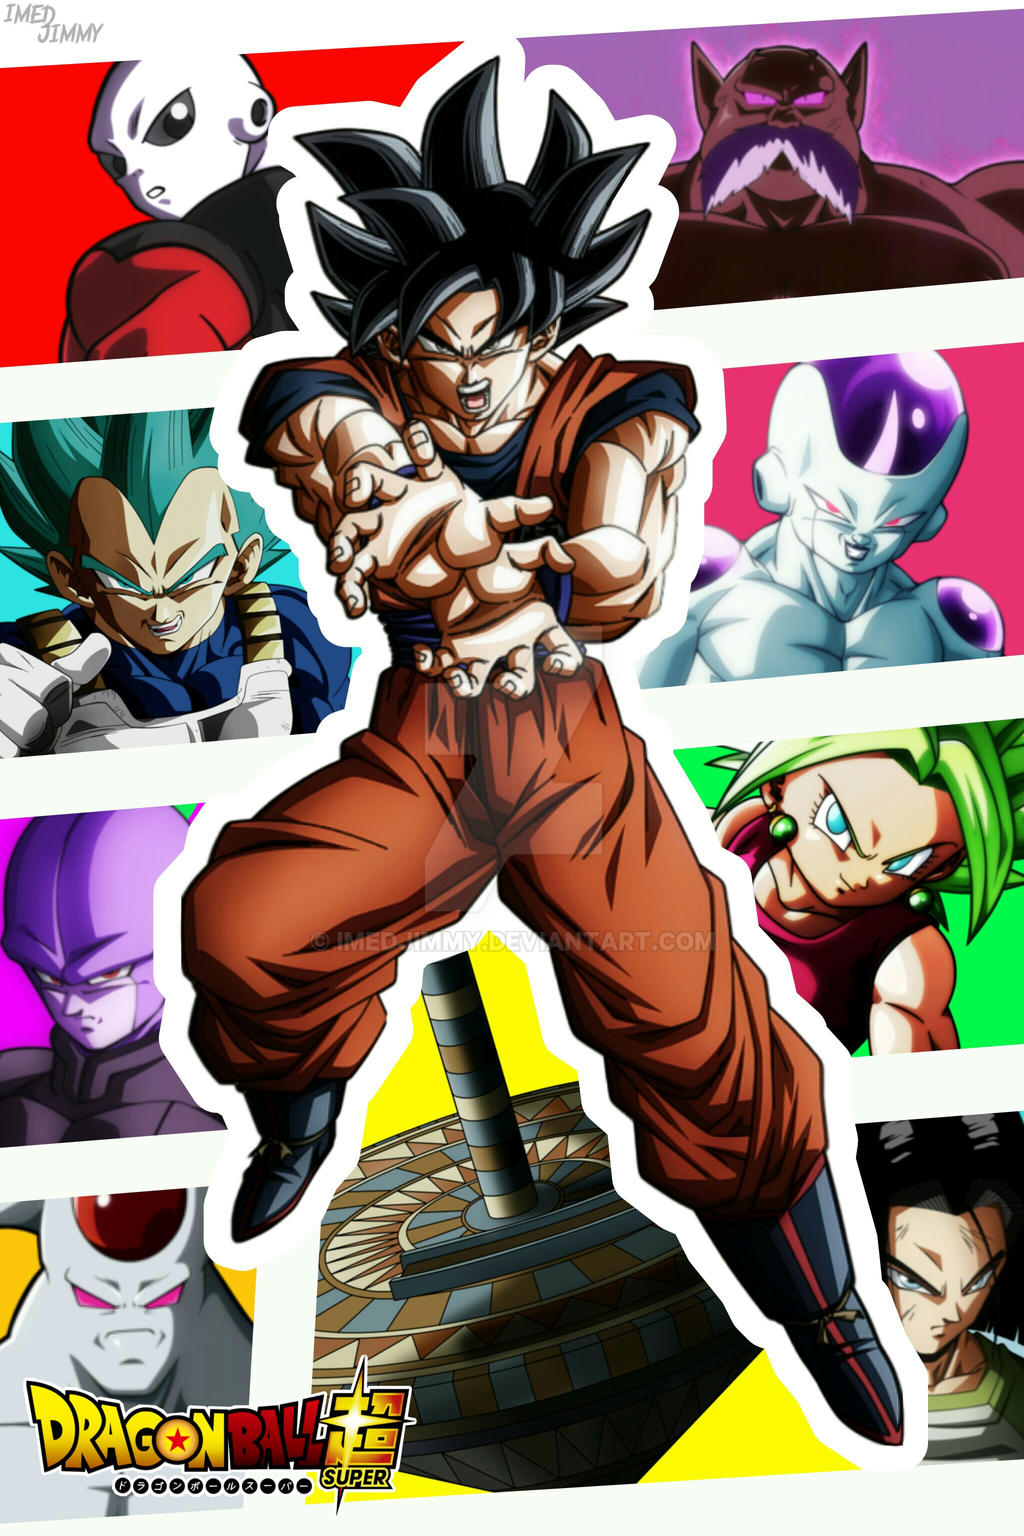 Dragon Ball Super Tournament of Power 2 WIP by obsolete00 on DeviantArt